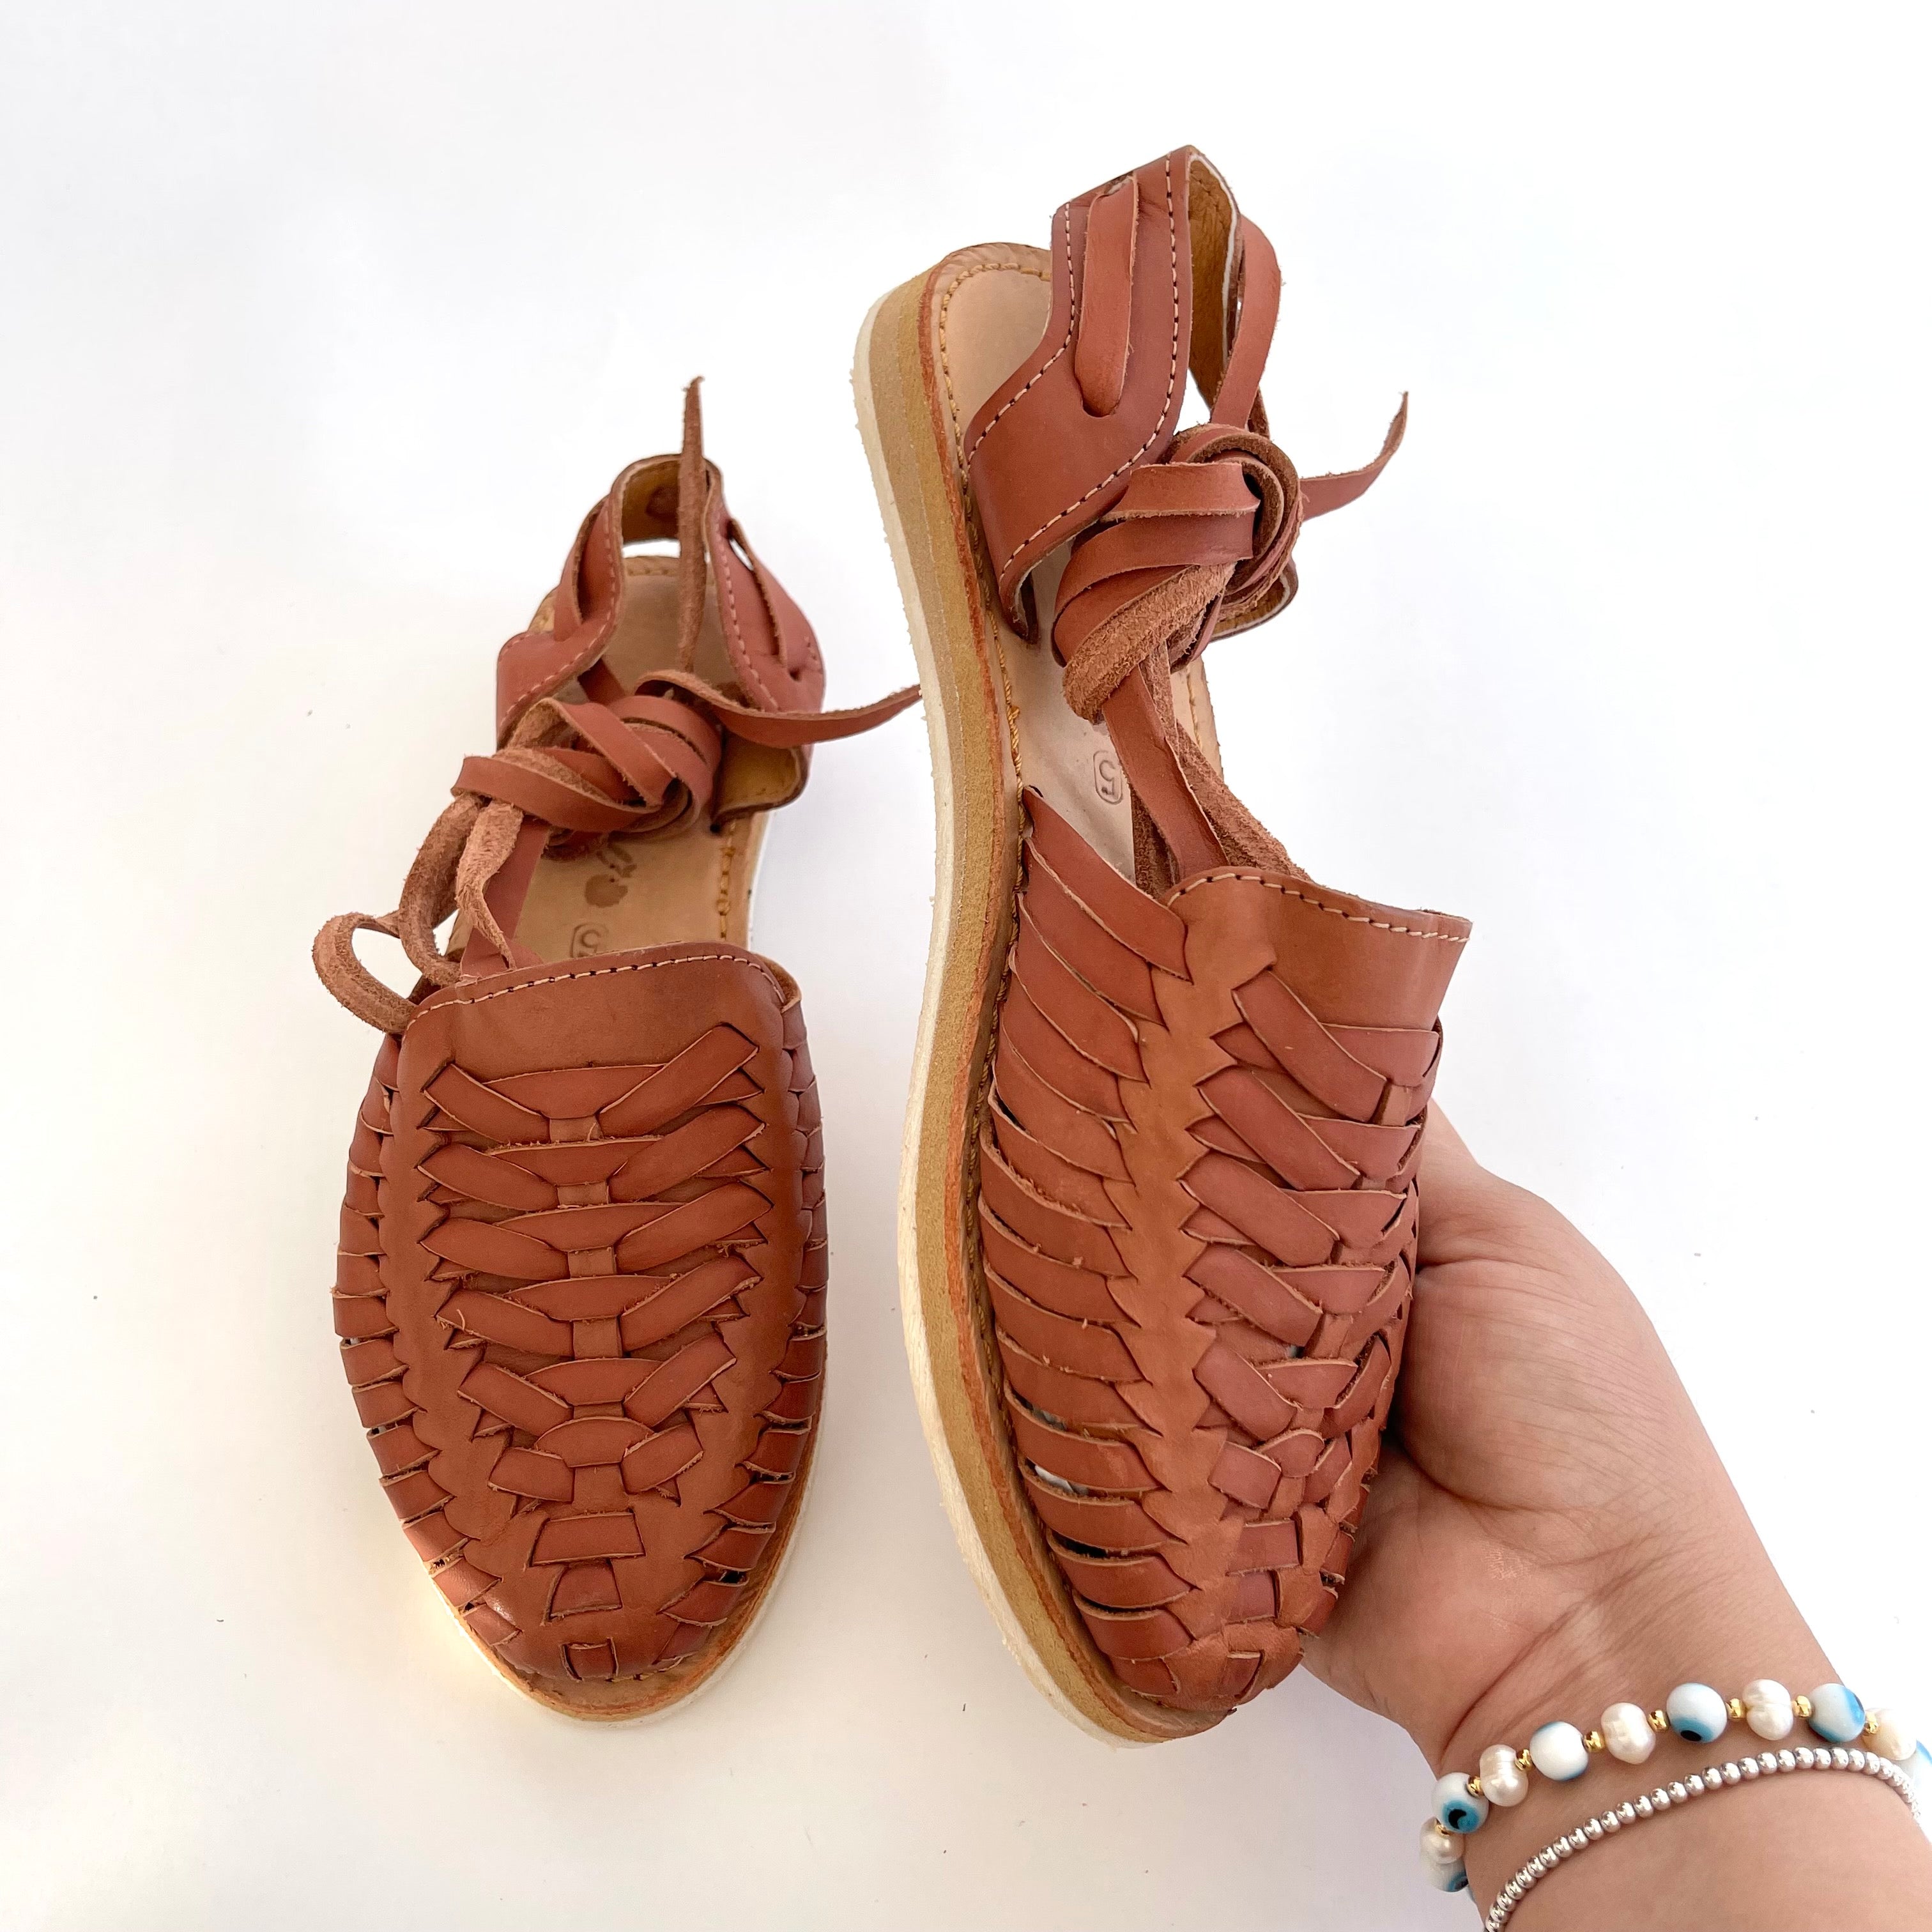 Victoria Lace-Up Huaraches - Brown